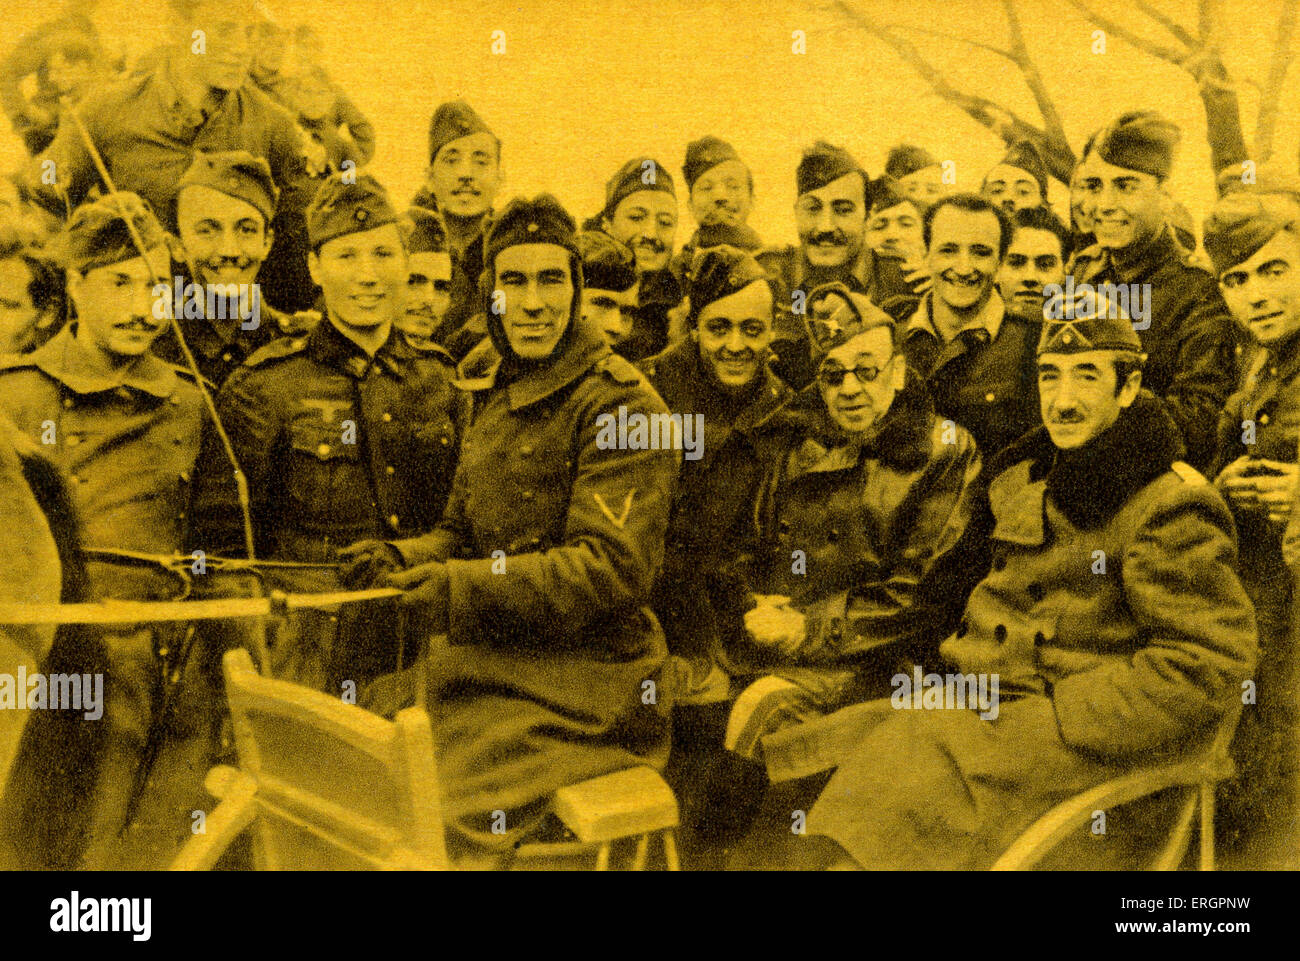 WW2 - Blue Division / División Azul. General Moscardo visiting the Eastern Front. Spanish Captain General, 26 October 1878 – 12 April 1956. Blue Division / División Azul, a unit of Spanish volunteers that served in the German Army on the Eastern Front of the Second World War. Stock Photo